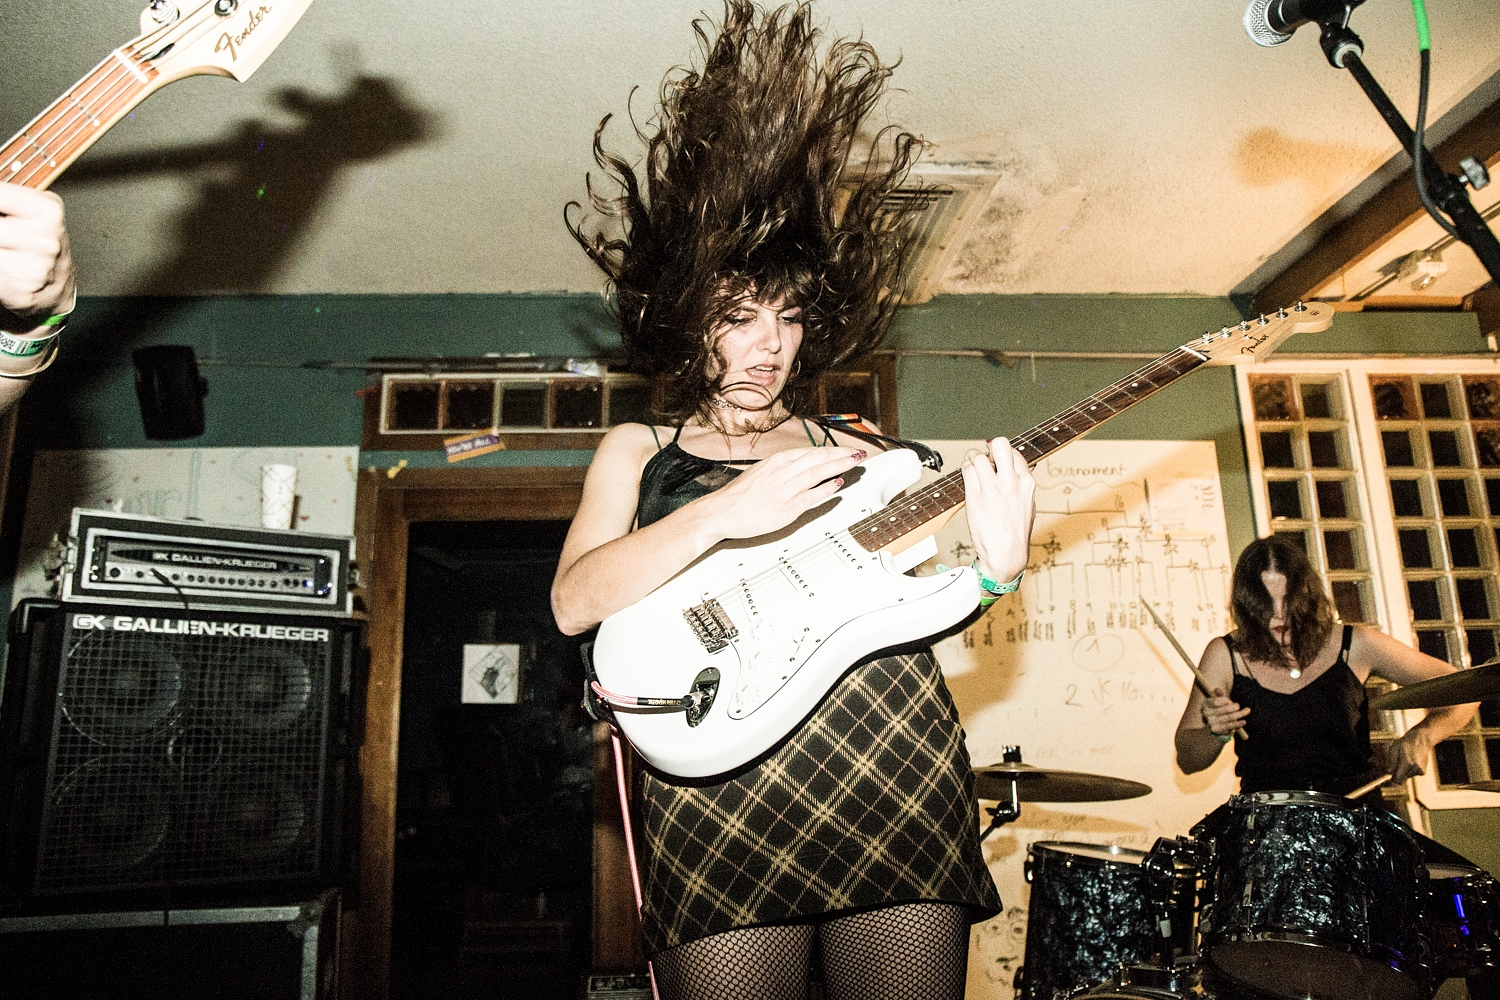 Day two of SXSW’s cross-continental highlights, feat Body Type, NOTHING and more